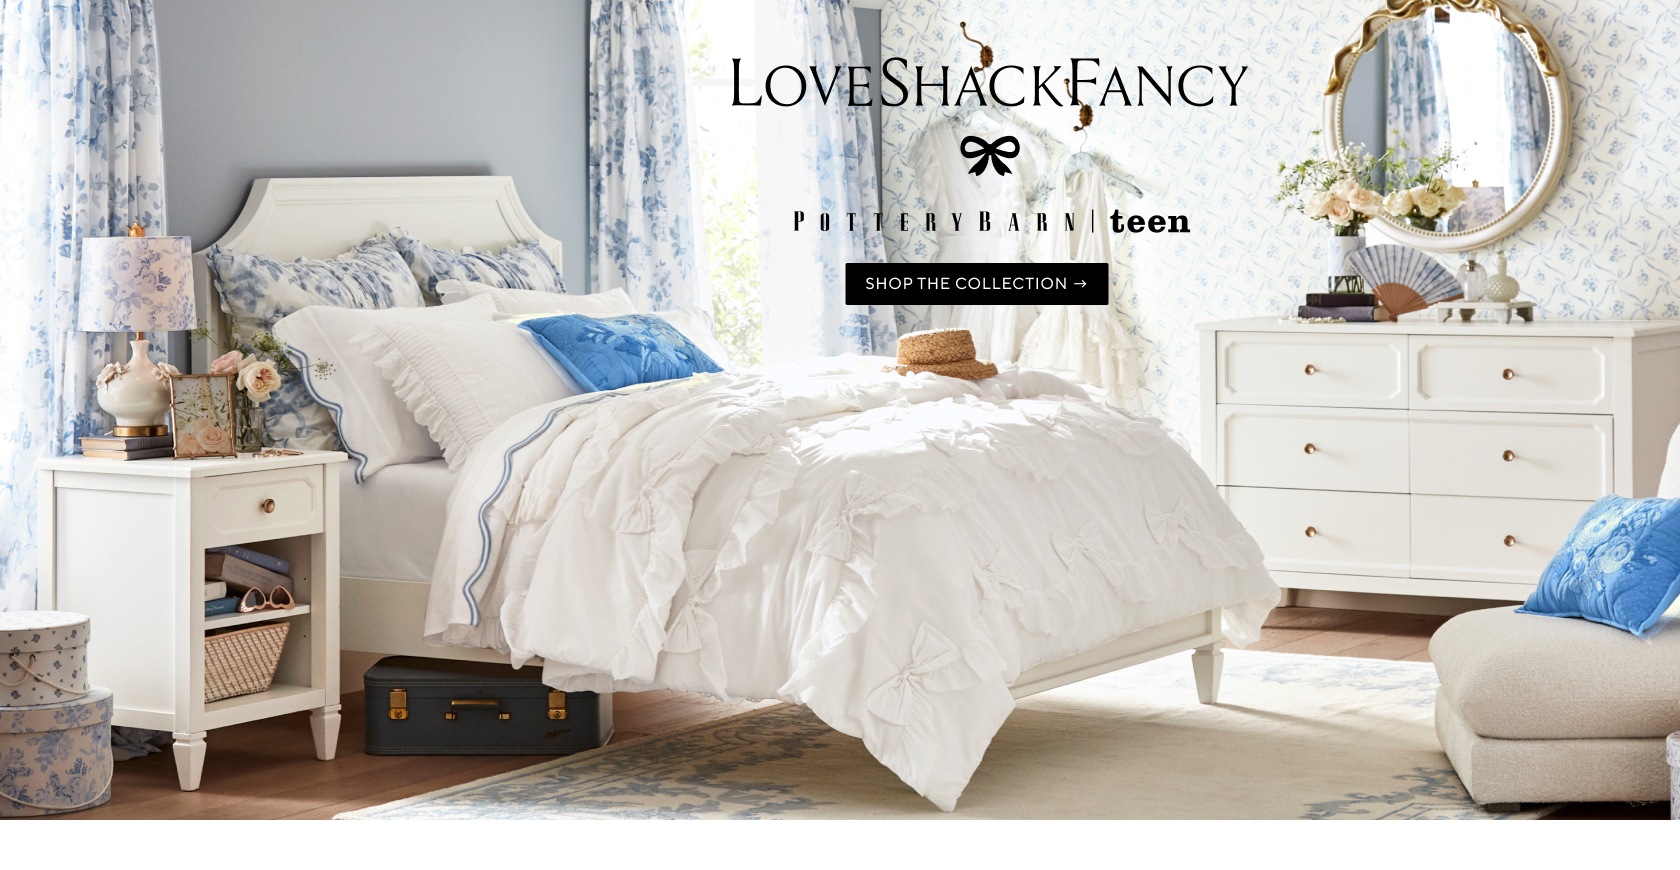 LoveShackFancy > Shop the Collection